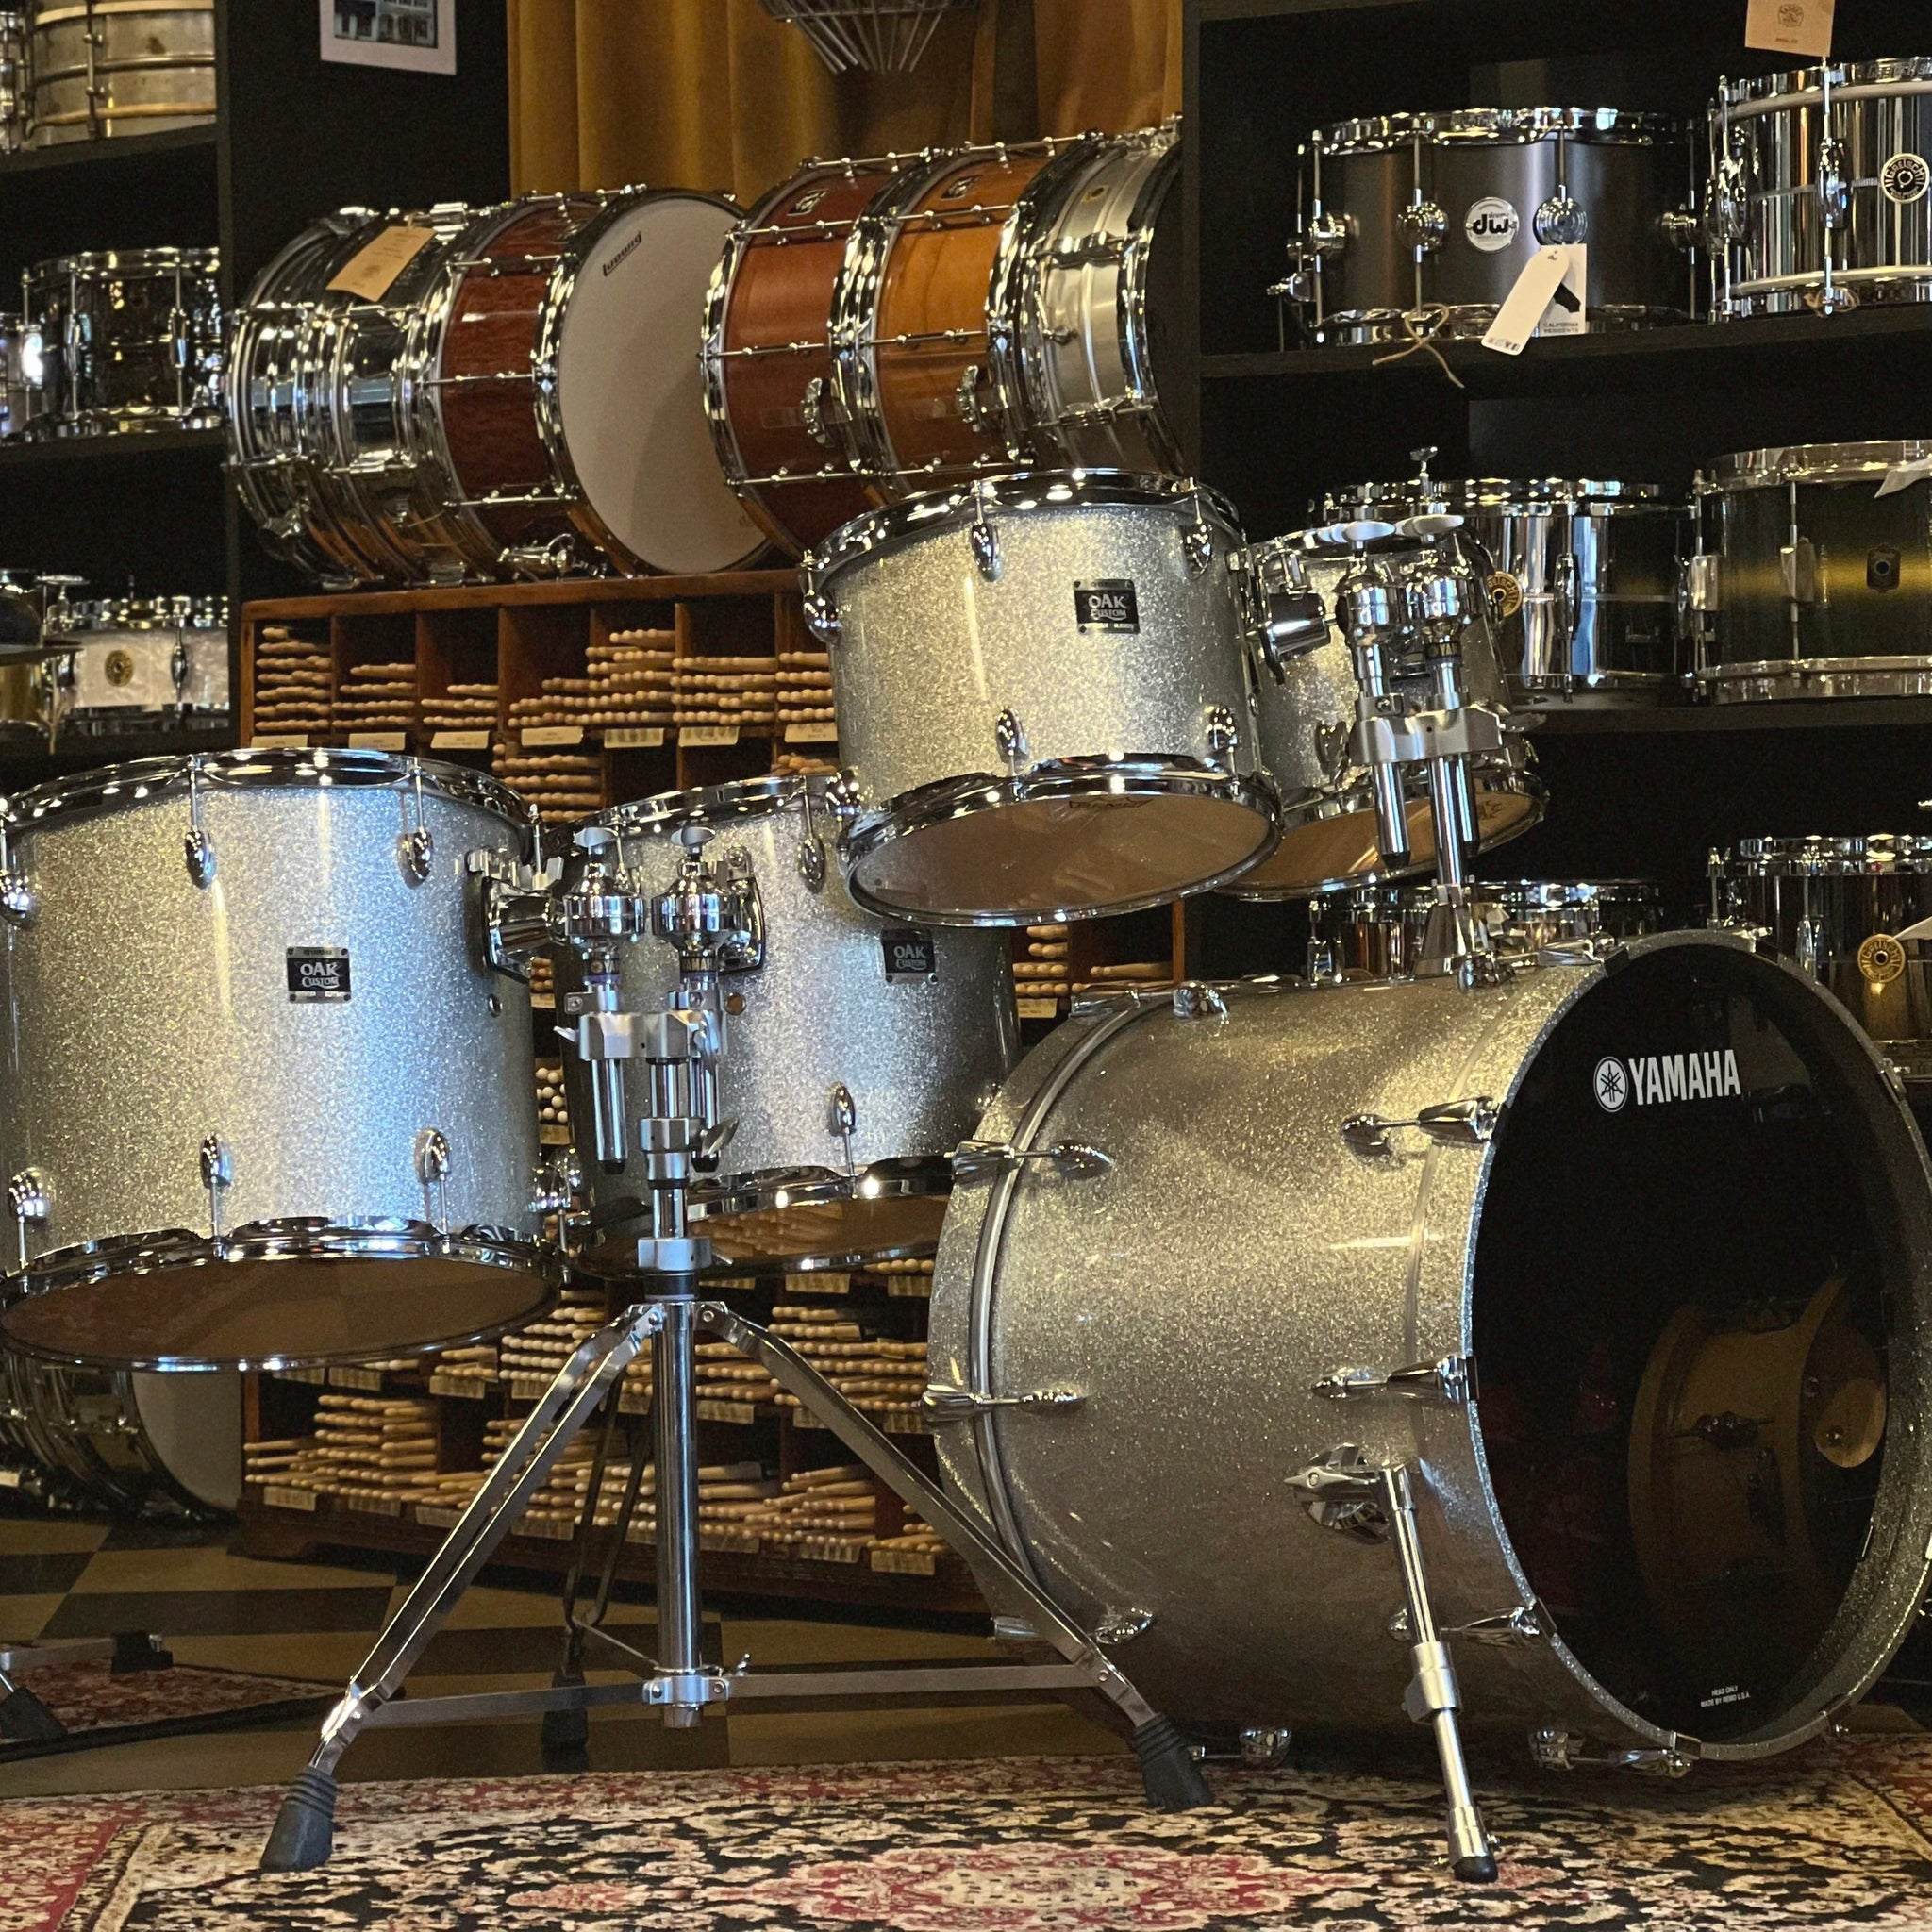 USED Yamaha Oak Custom Drum Set in Silver Sparkle Lacquer - 17x22, 8x10, 9x12, 12x14, 14x16